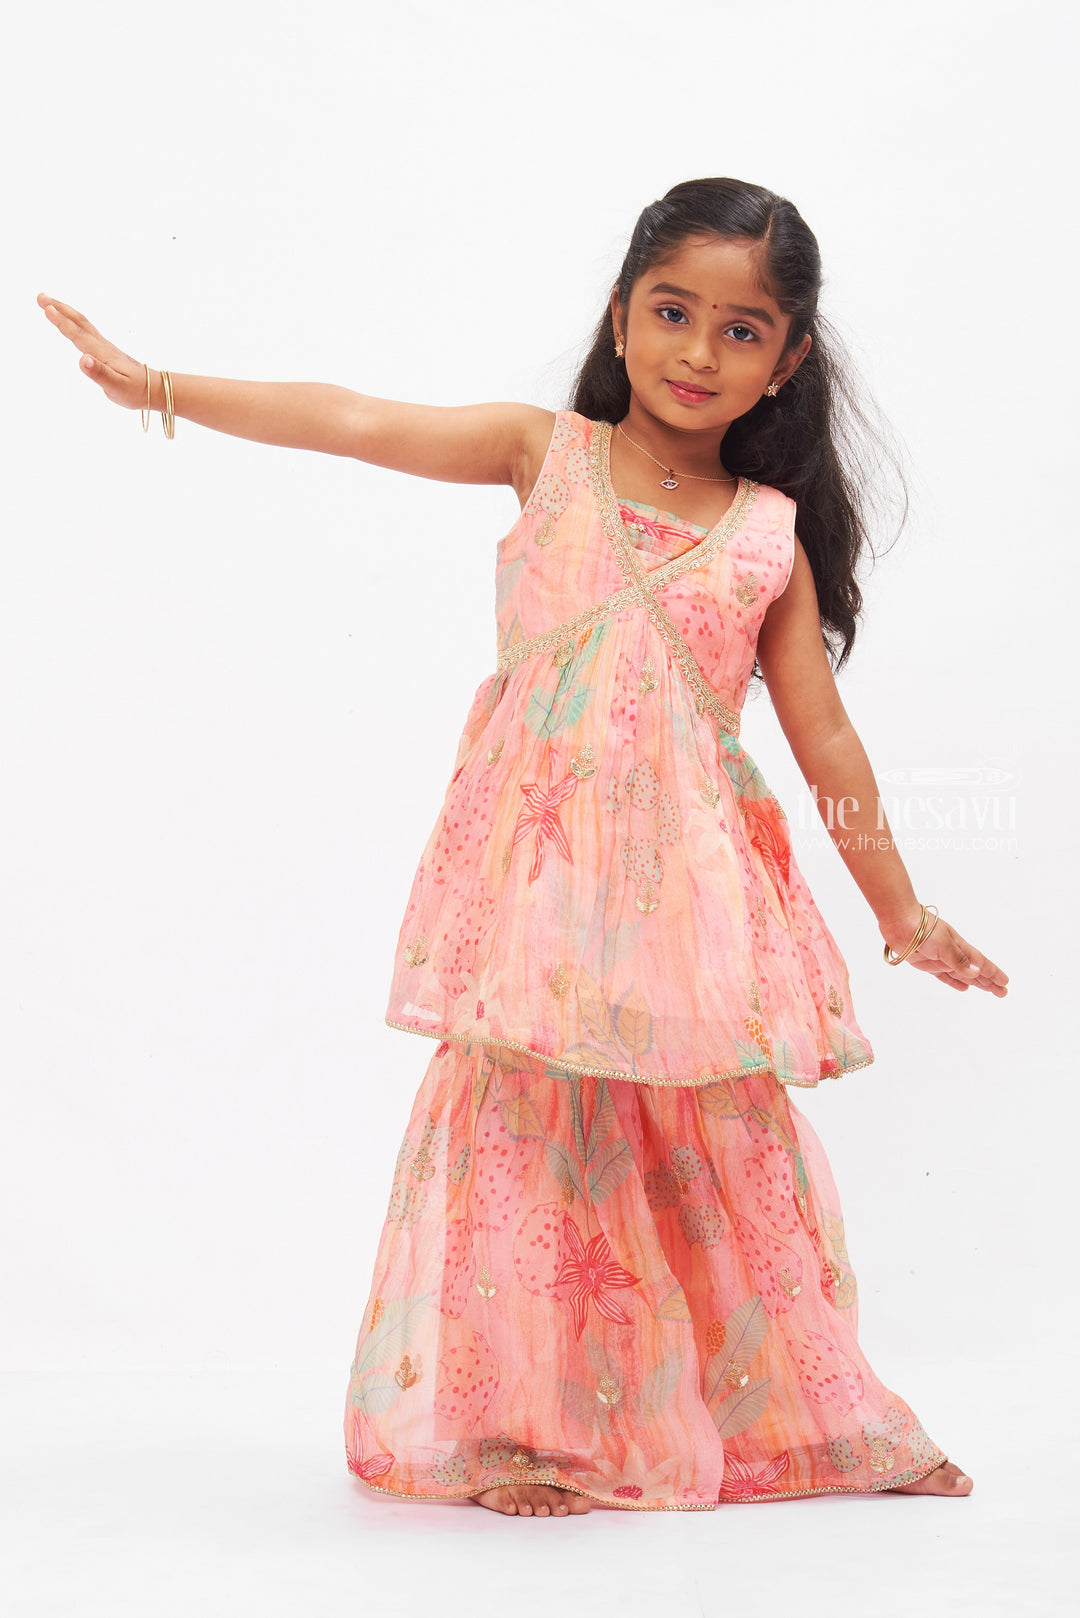 The Nesavu Girls Sharara / Plazo Set Sparkling Pink Gharara Set with Sequined Accents for Girls Nesavu Buy Girls Pink Sequined Gharara Set | Floral Printed Ethnic Wear | The Nesavu